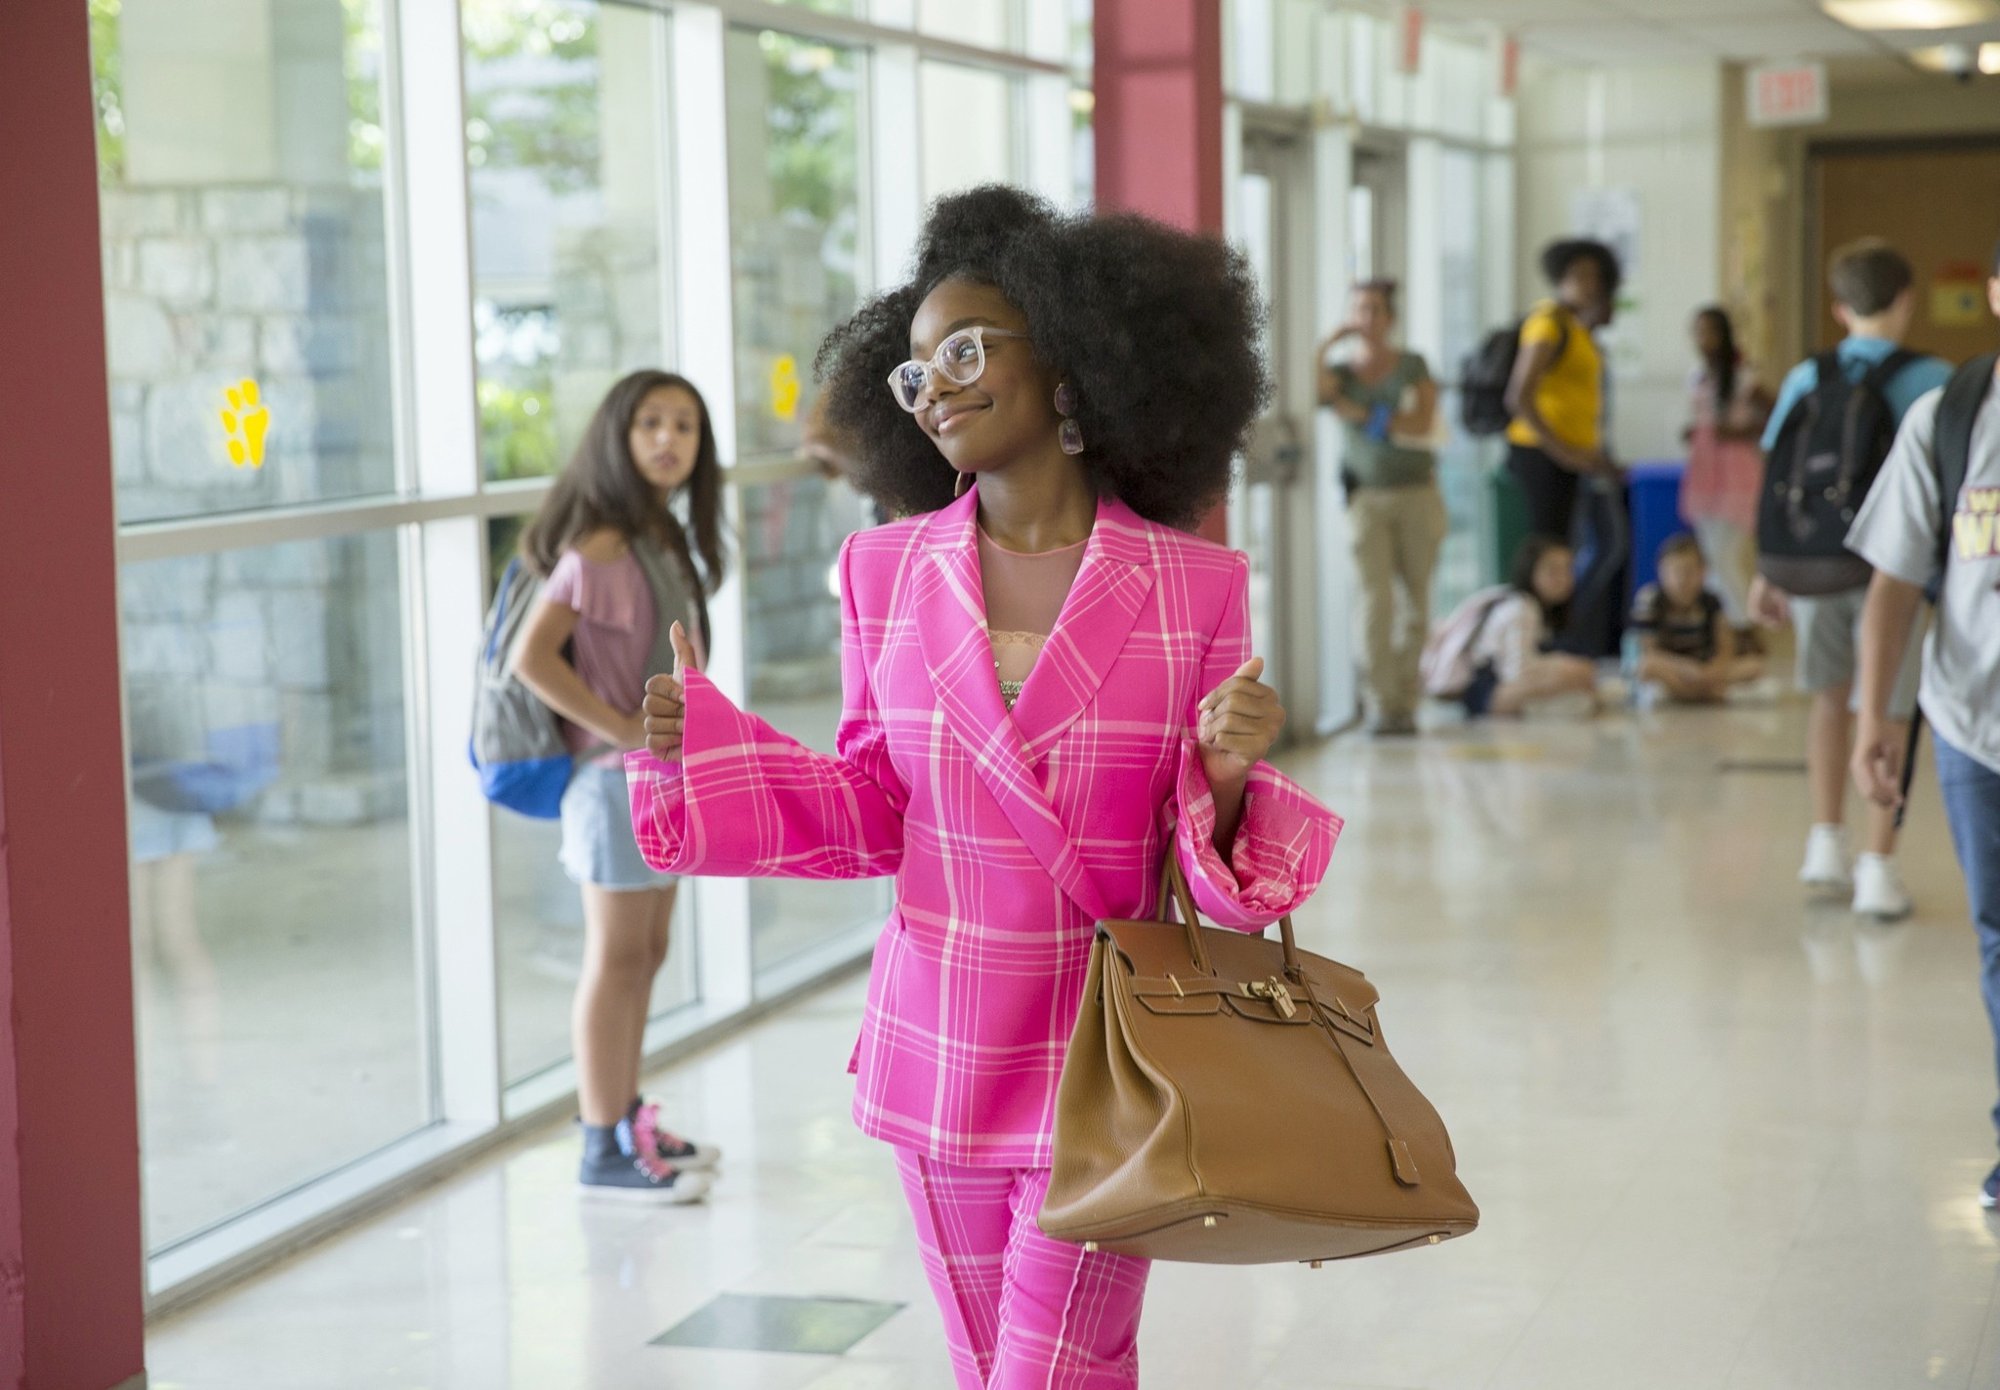 Marsai Martin stars as Young Jordan in Universal Pictures' Little (2019)